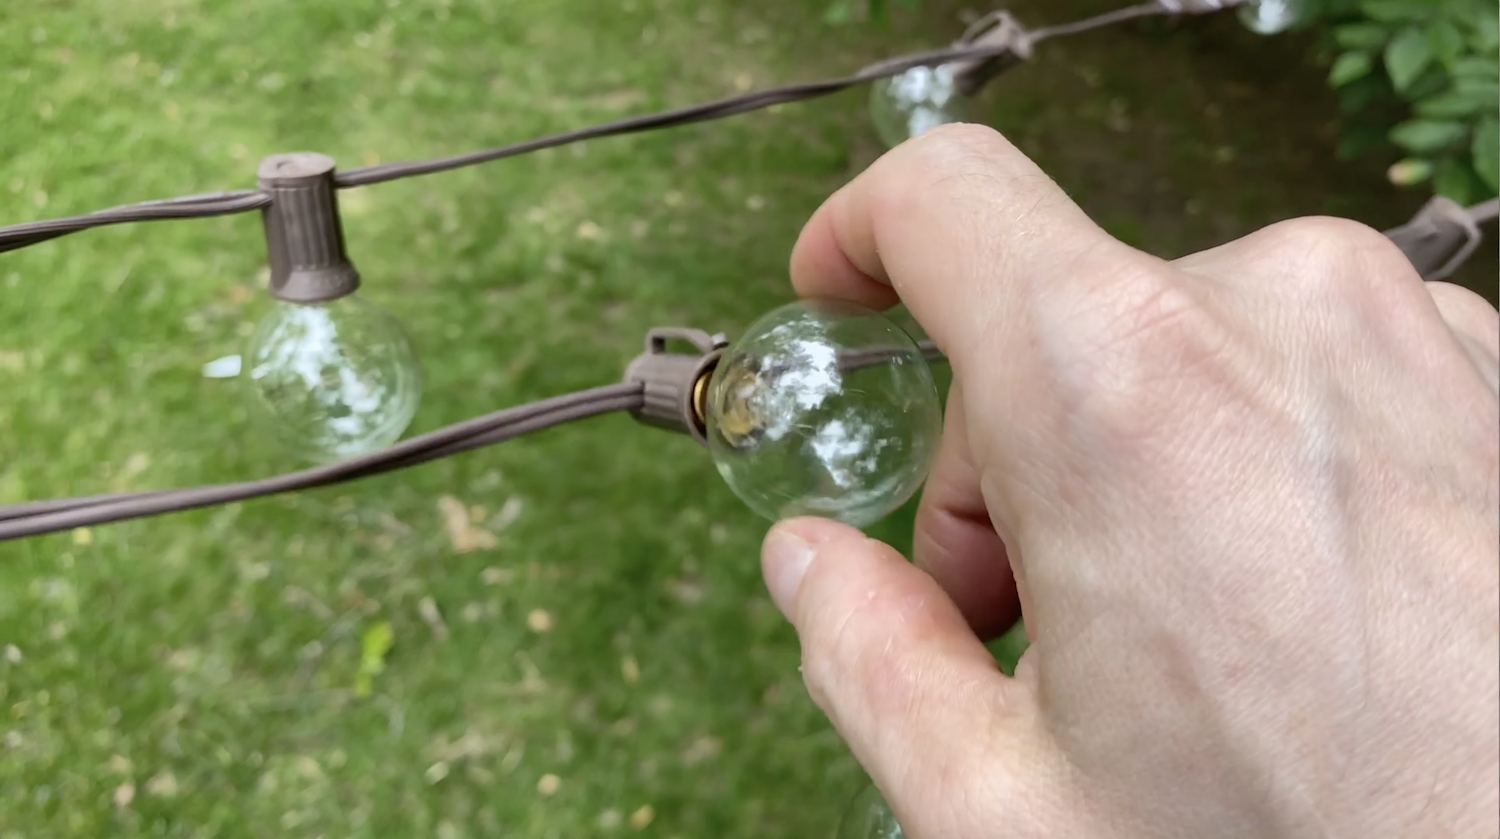 How to Hang String Lights - Tips for a Backyard String Lights